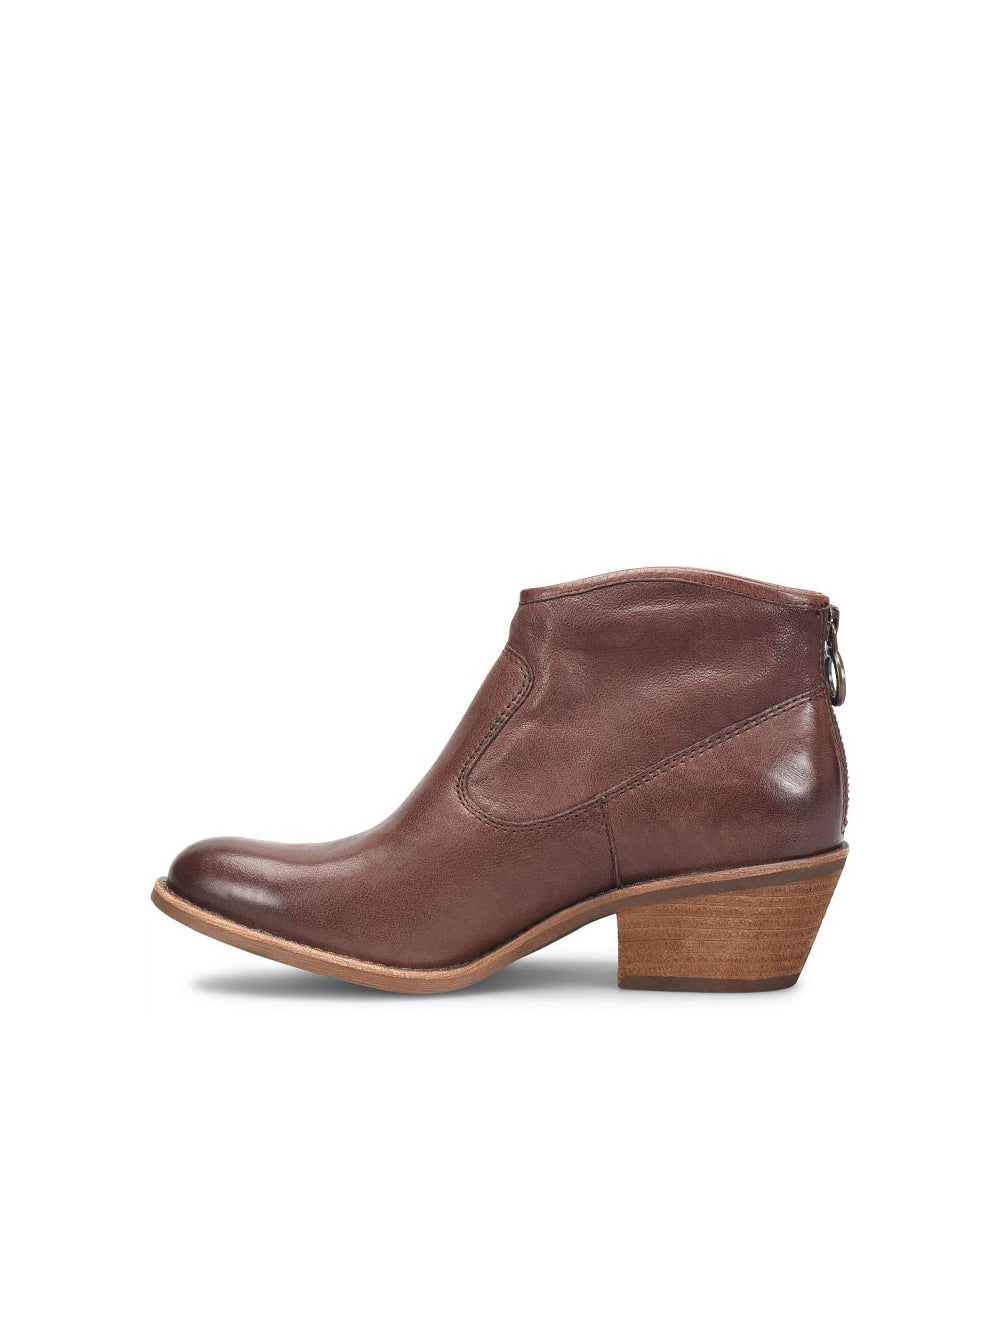 sofft shoes aisley heeled ankle bootie with back zipper in cocoa brown leather